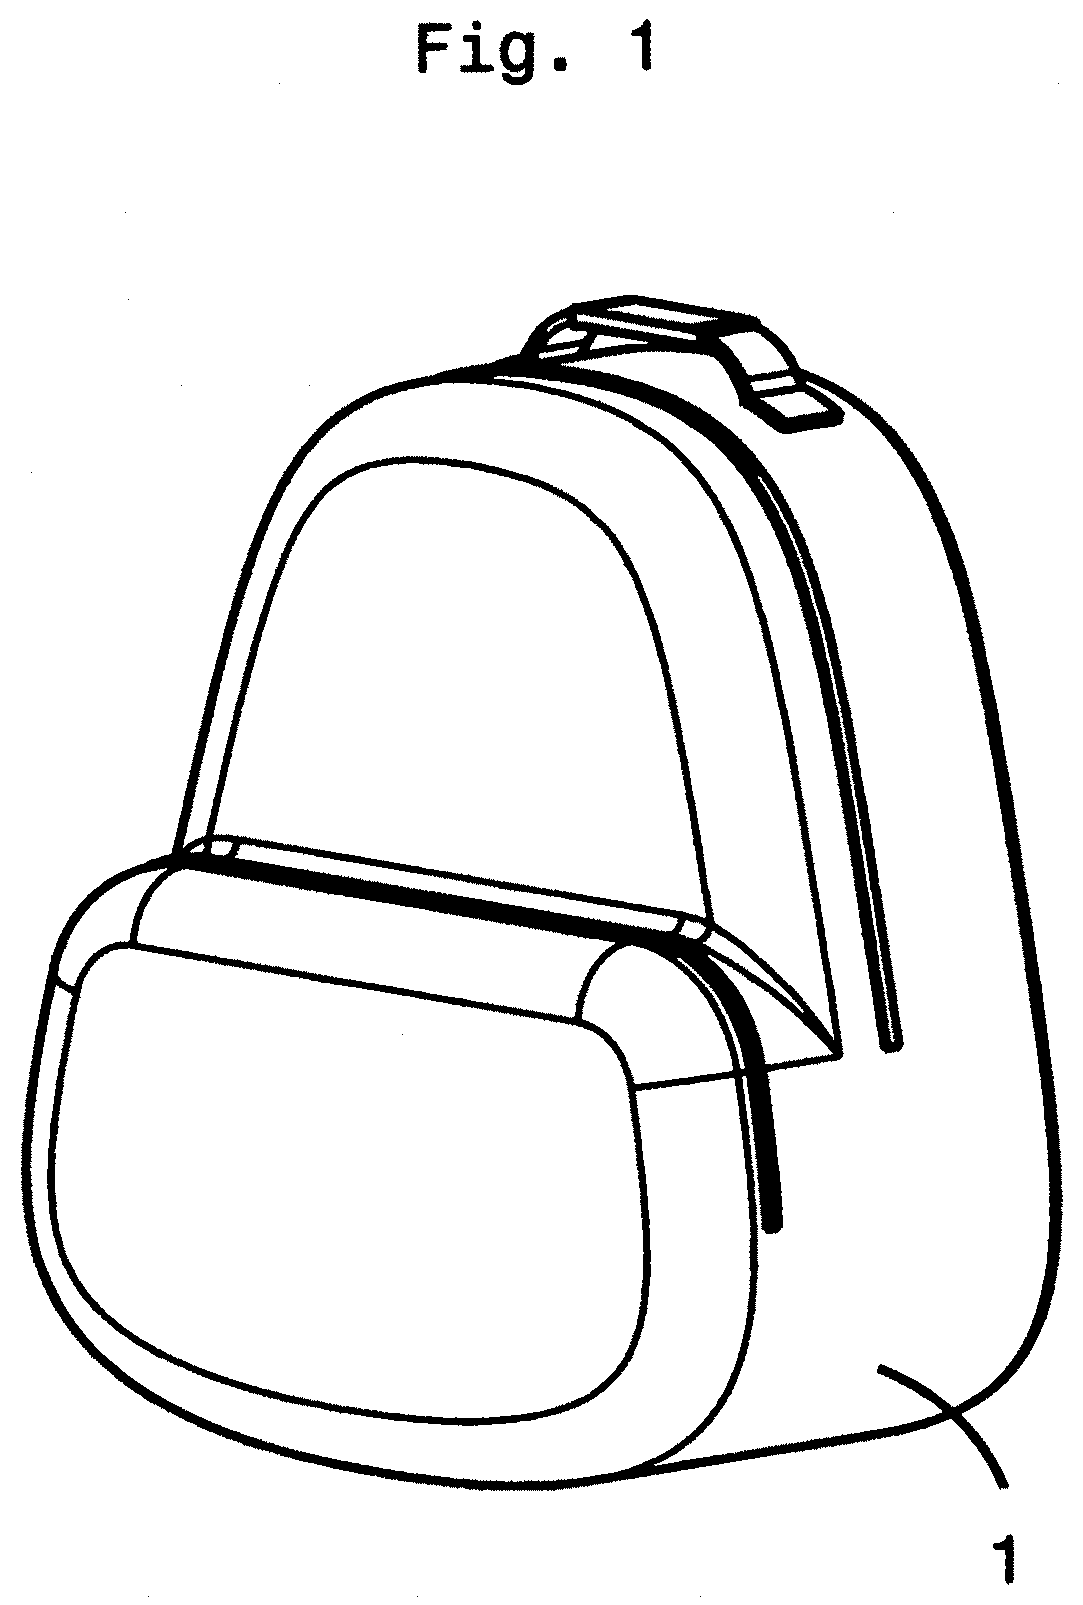 Combination backpack with removable back support